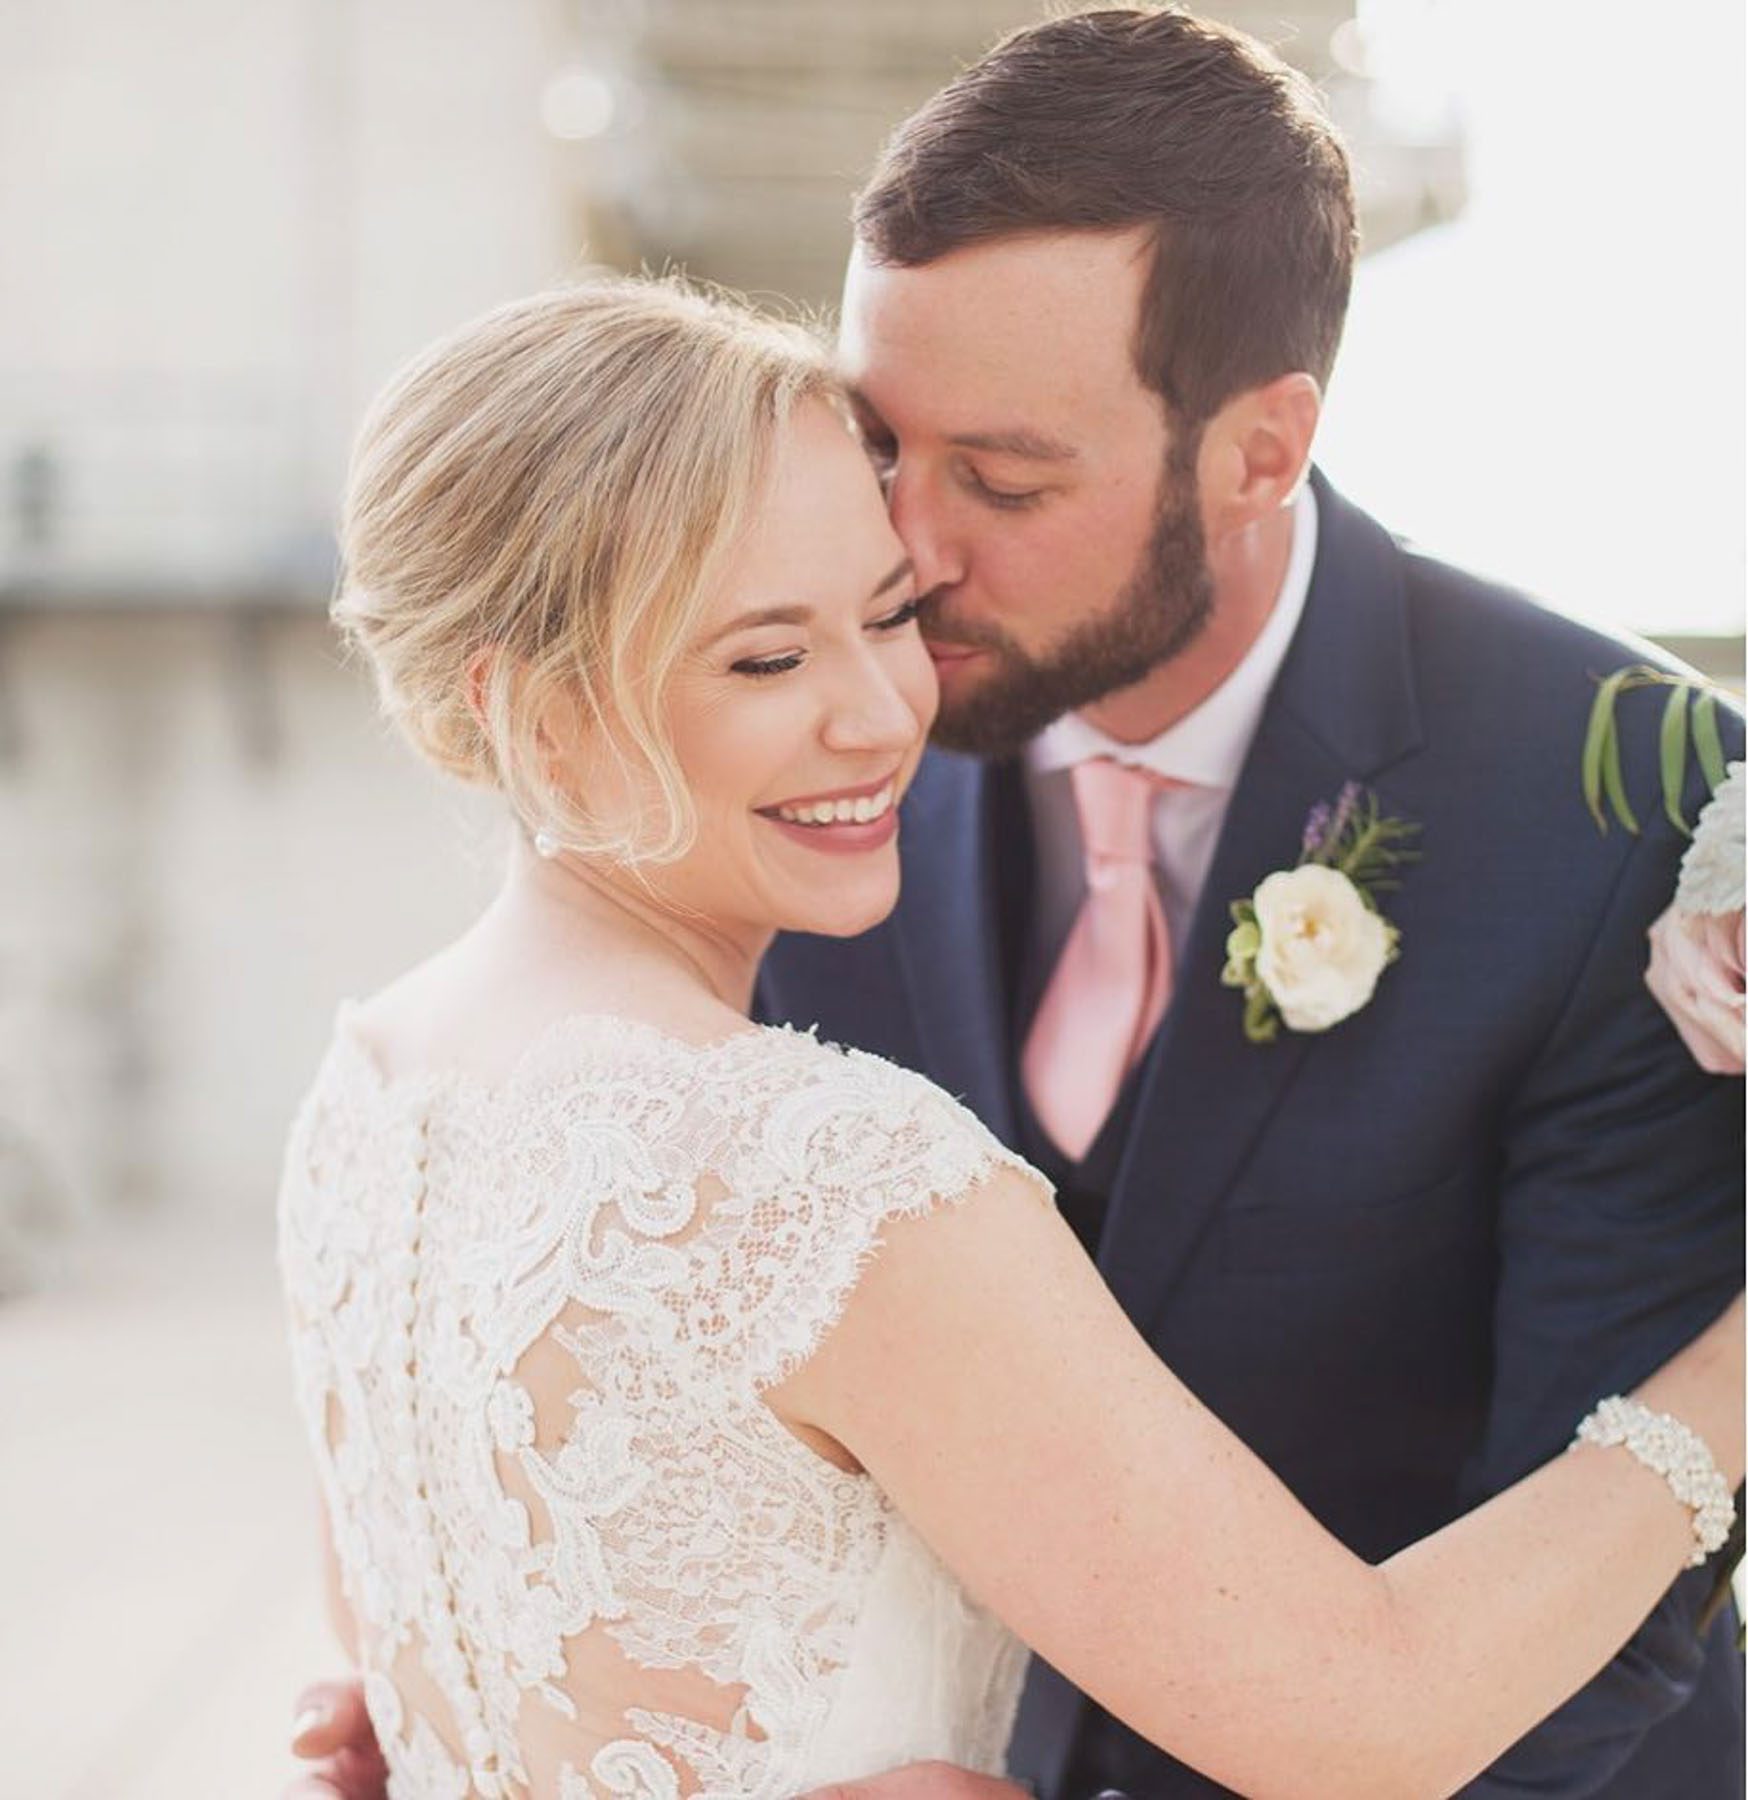 Bride and groom relax before ceremony, wedding photographer krista lee discusses the pros and cons of first look vs traditional wedding ceremony